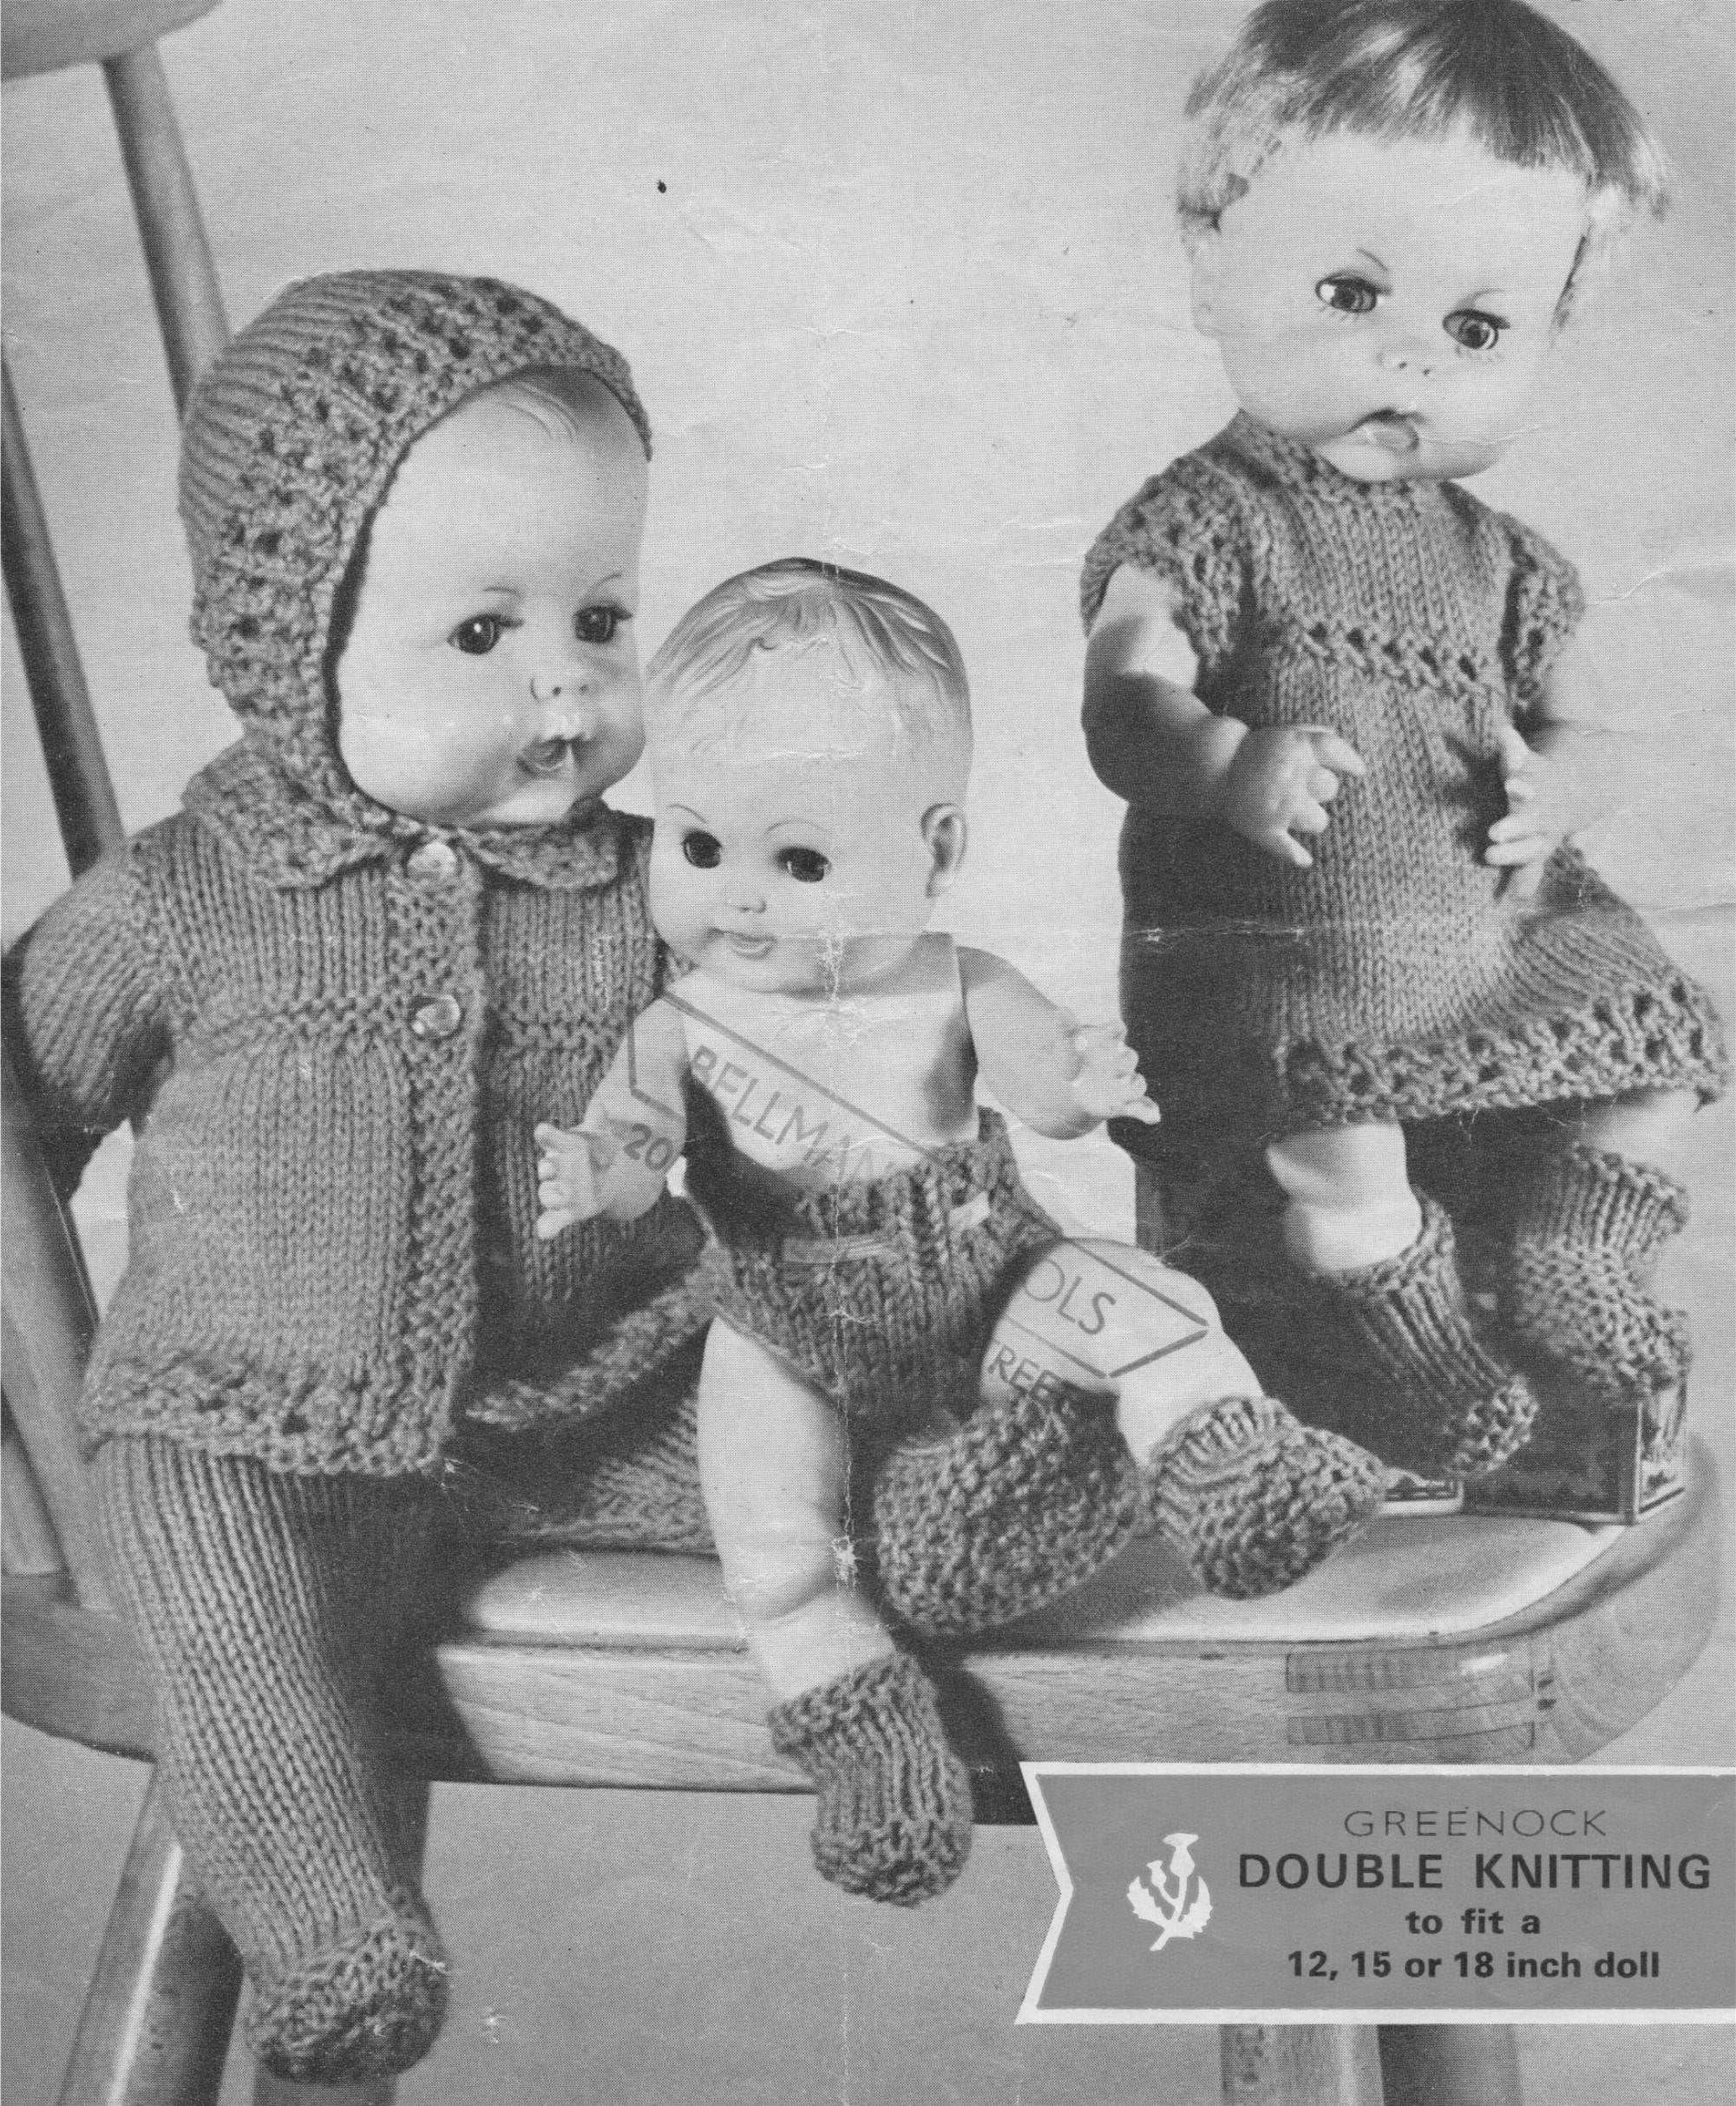 Knitting Patterns For Baby Dolls Clothes Dolls Clothes Knitting Pattern Pdf For 12 15 And 18 Inch Ba Doll Tiny Tears Ba Annabell Doll Vintage Knitting Patterns For Dolls